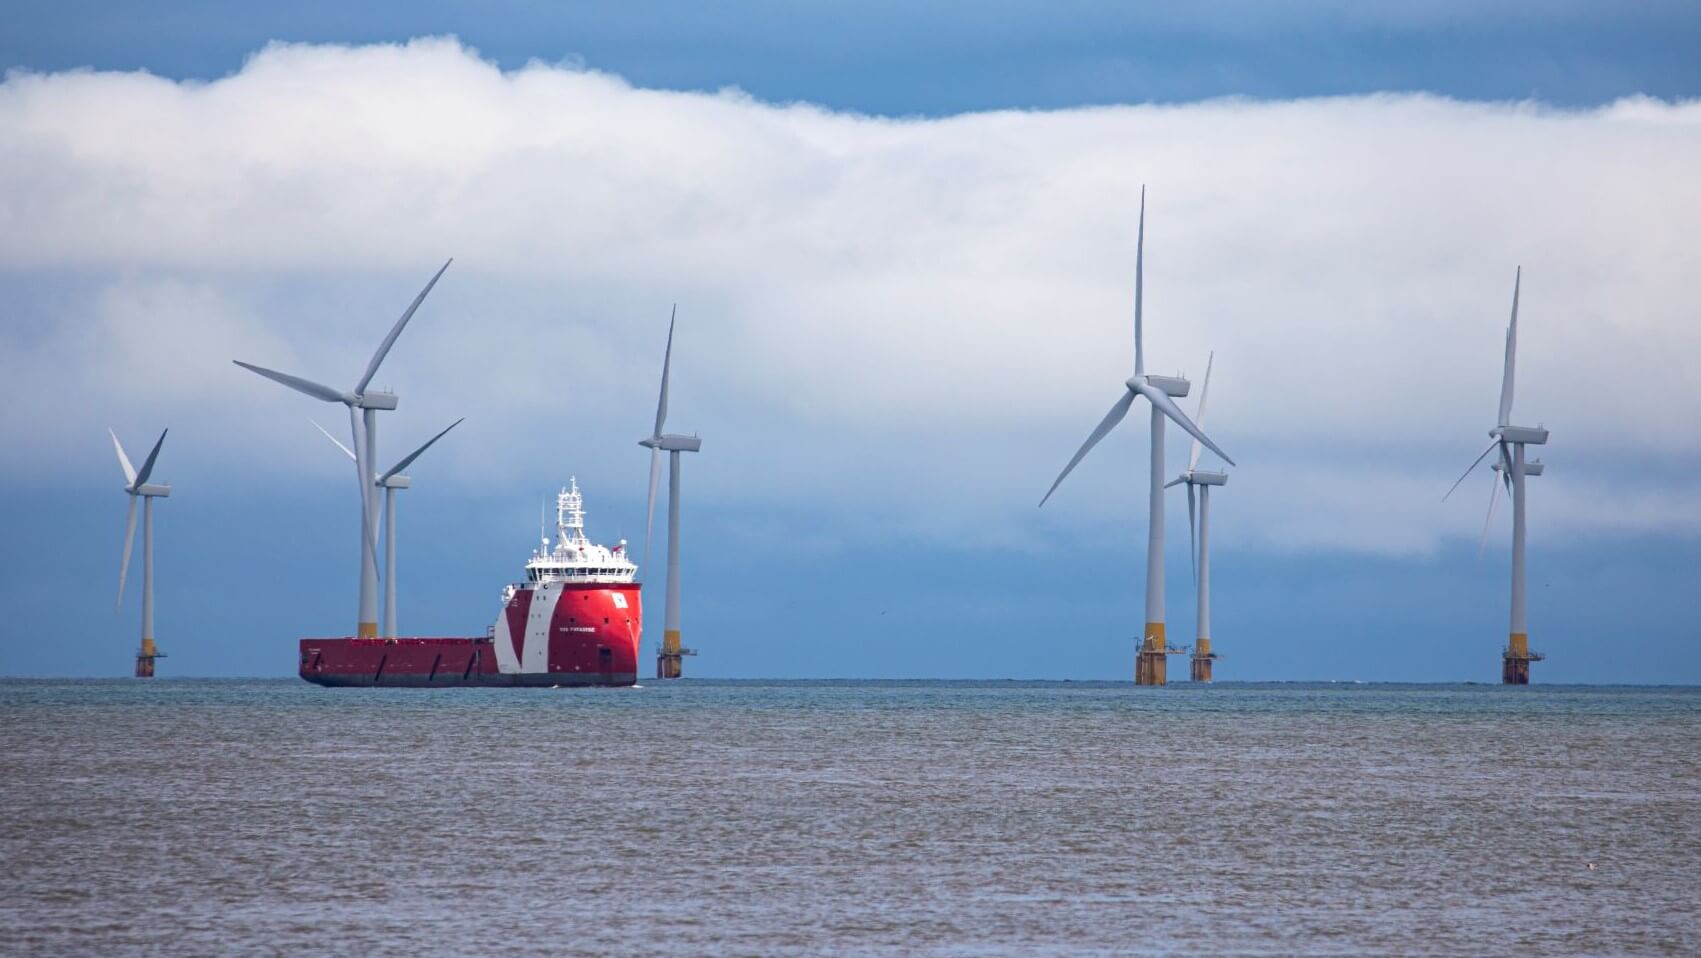 Seven offshore wind turbines and a vessel at sea, set against cloudy sky